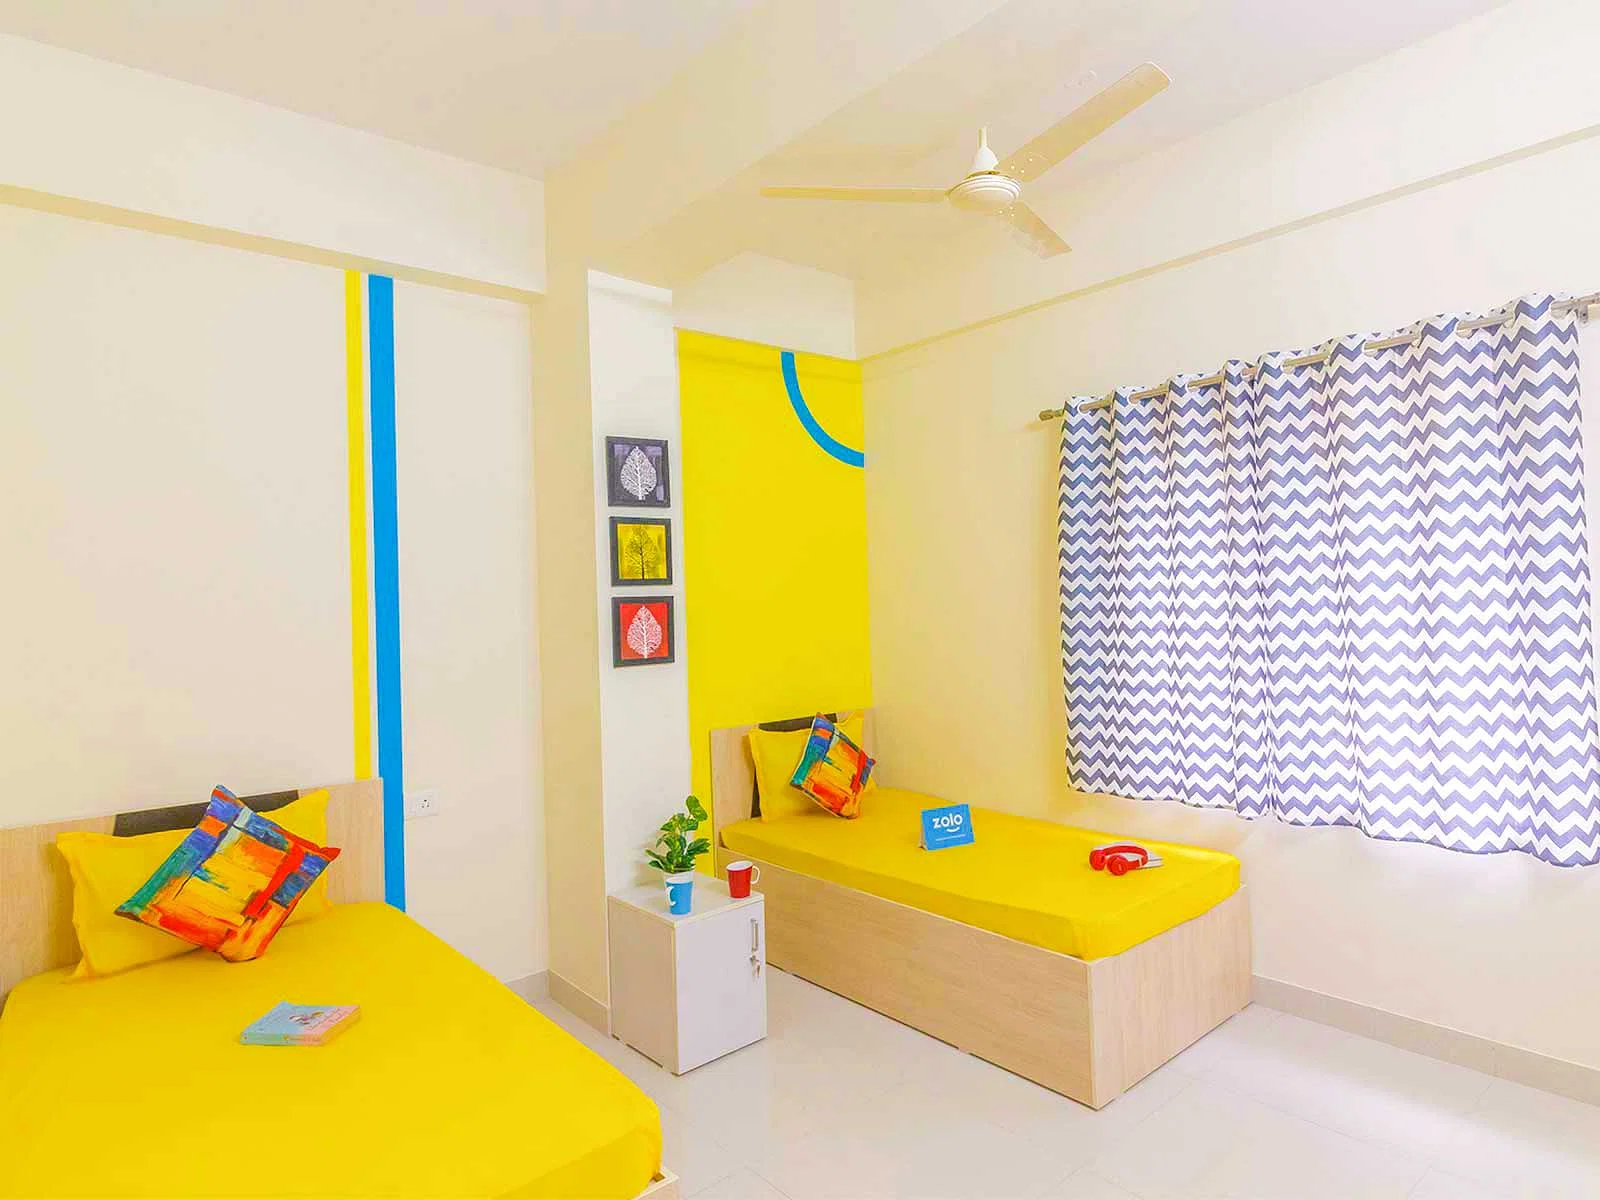 budget-friendly PGs and hostels for men and women with single rooms with daily hopusekeeping-Zolo Phantom